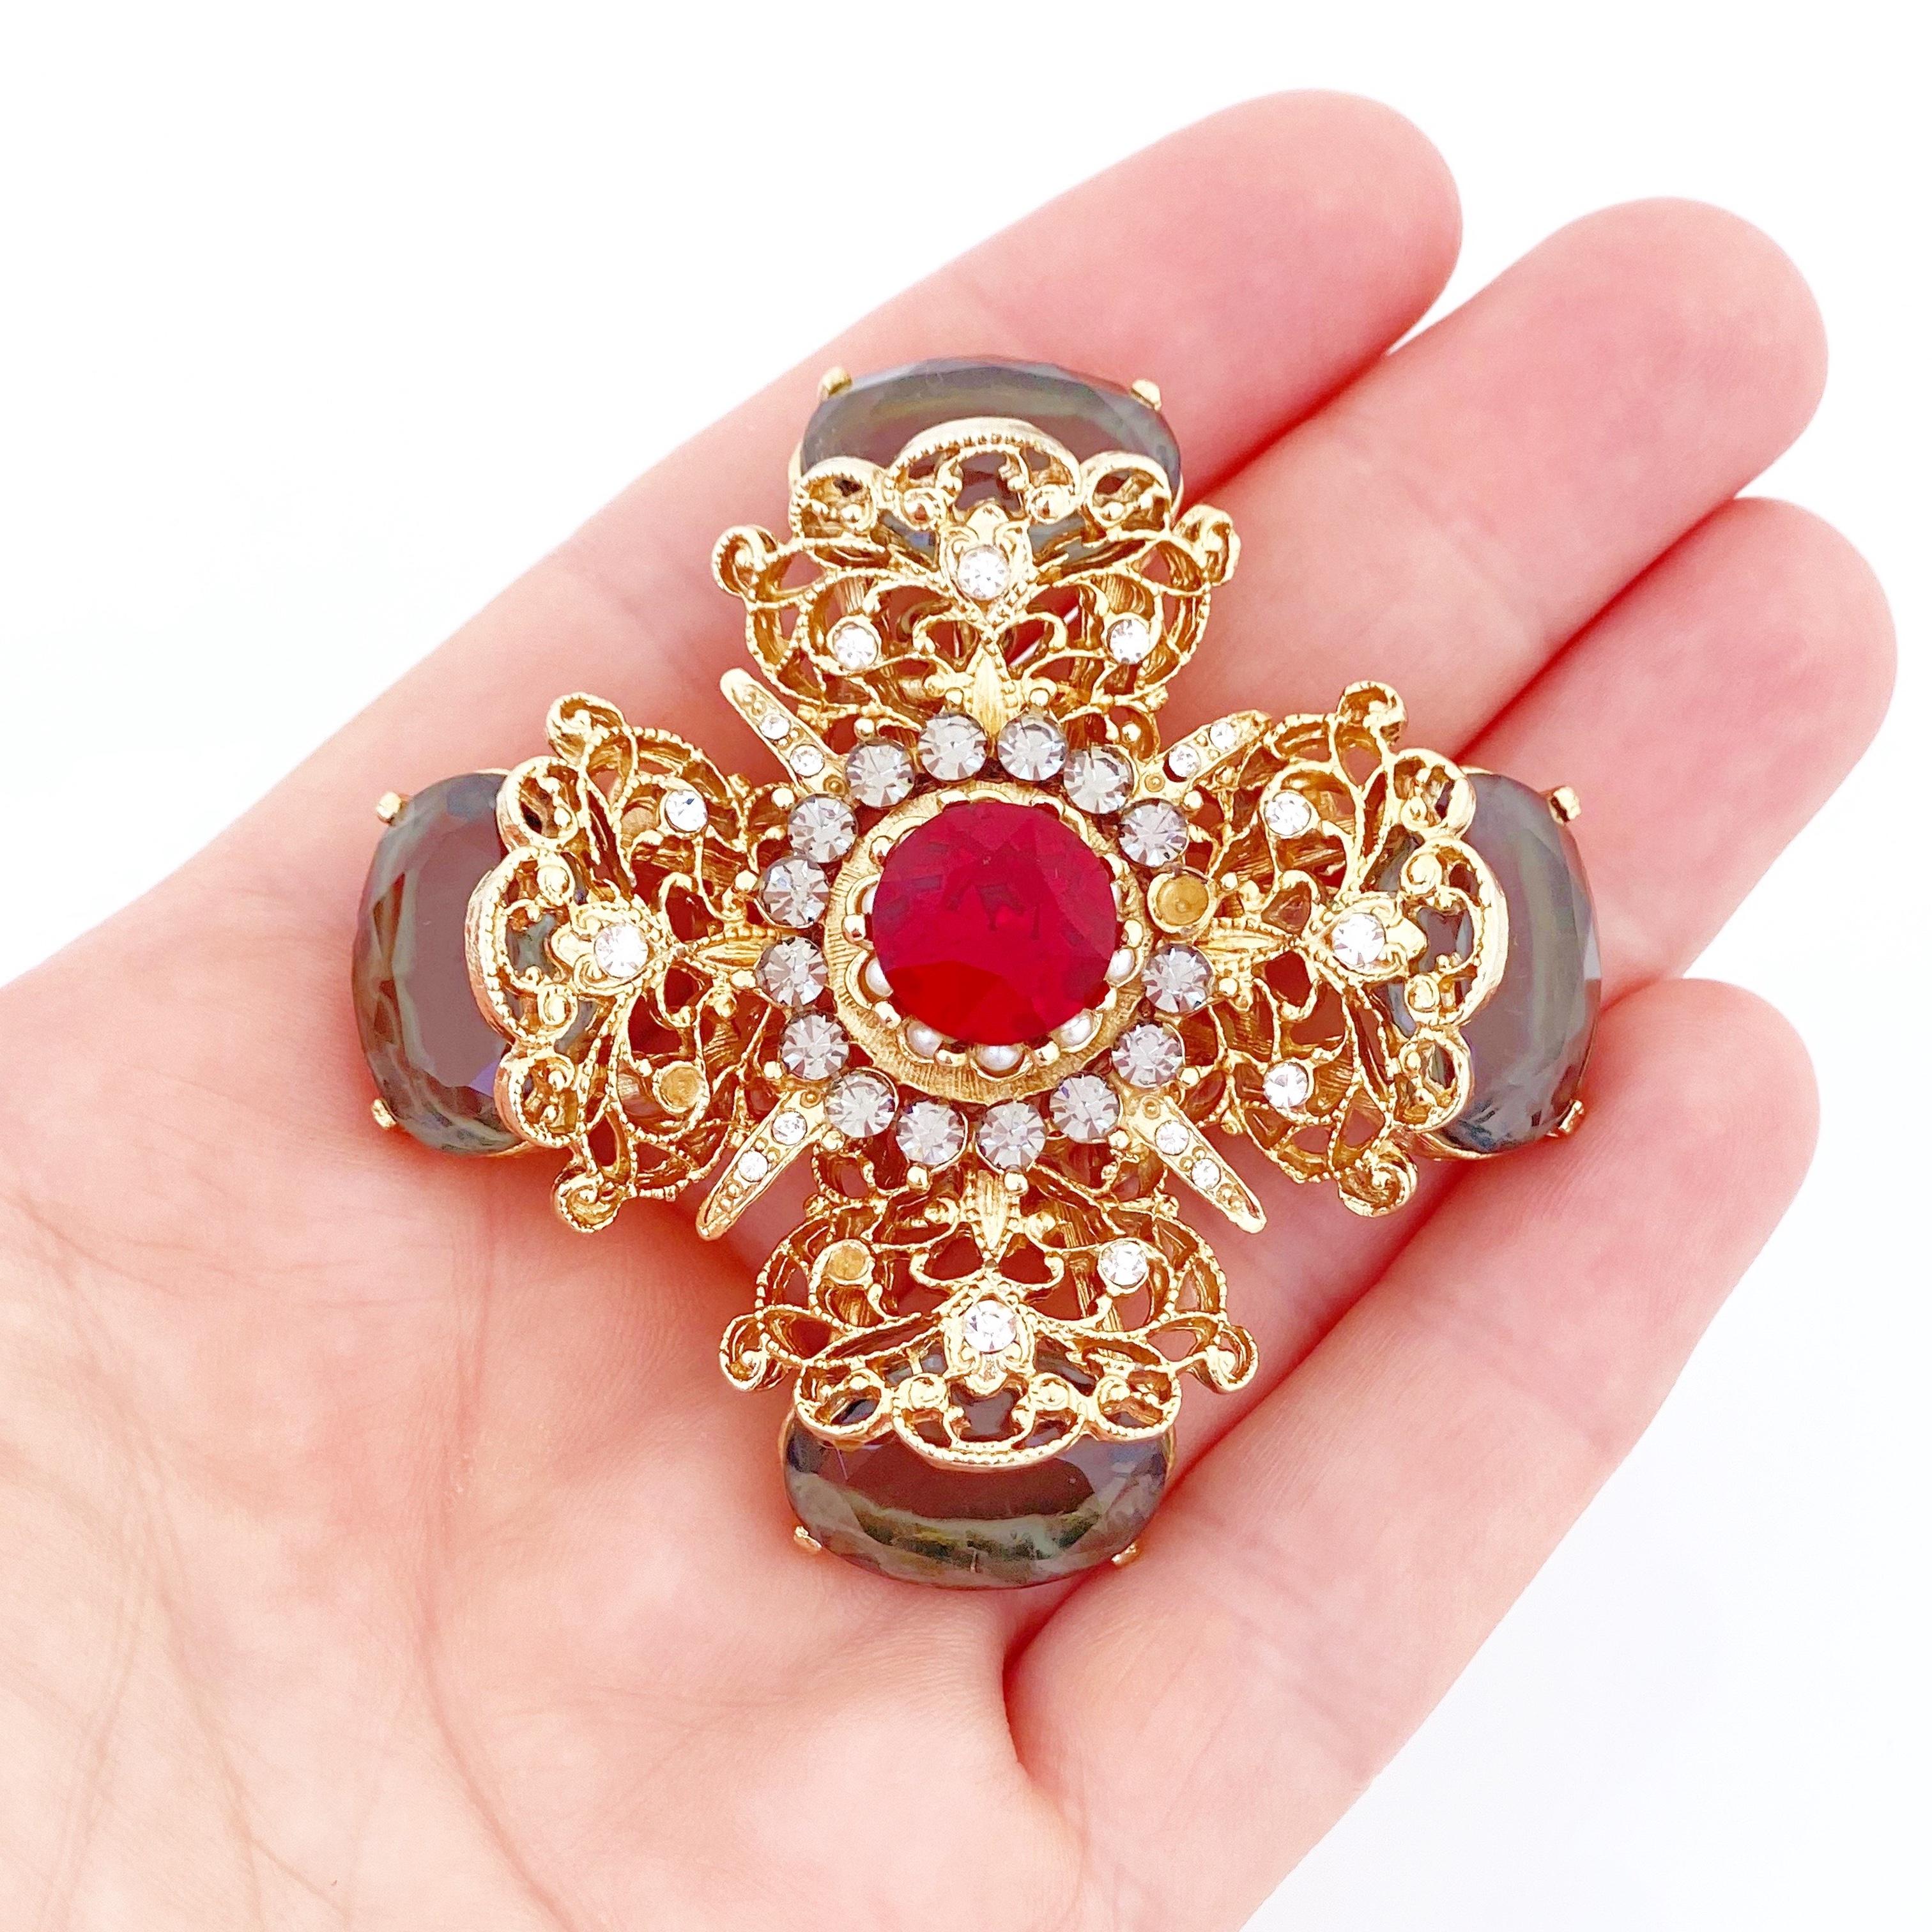 Ornate Cross Brooch With Ruby Red & Gray Crystals By Capri, 1970s 1